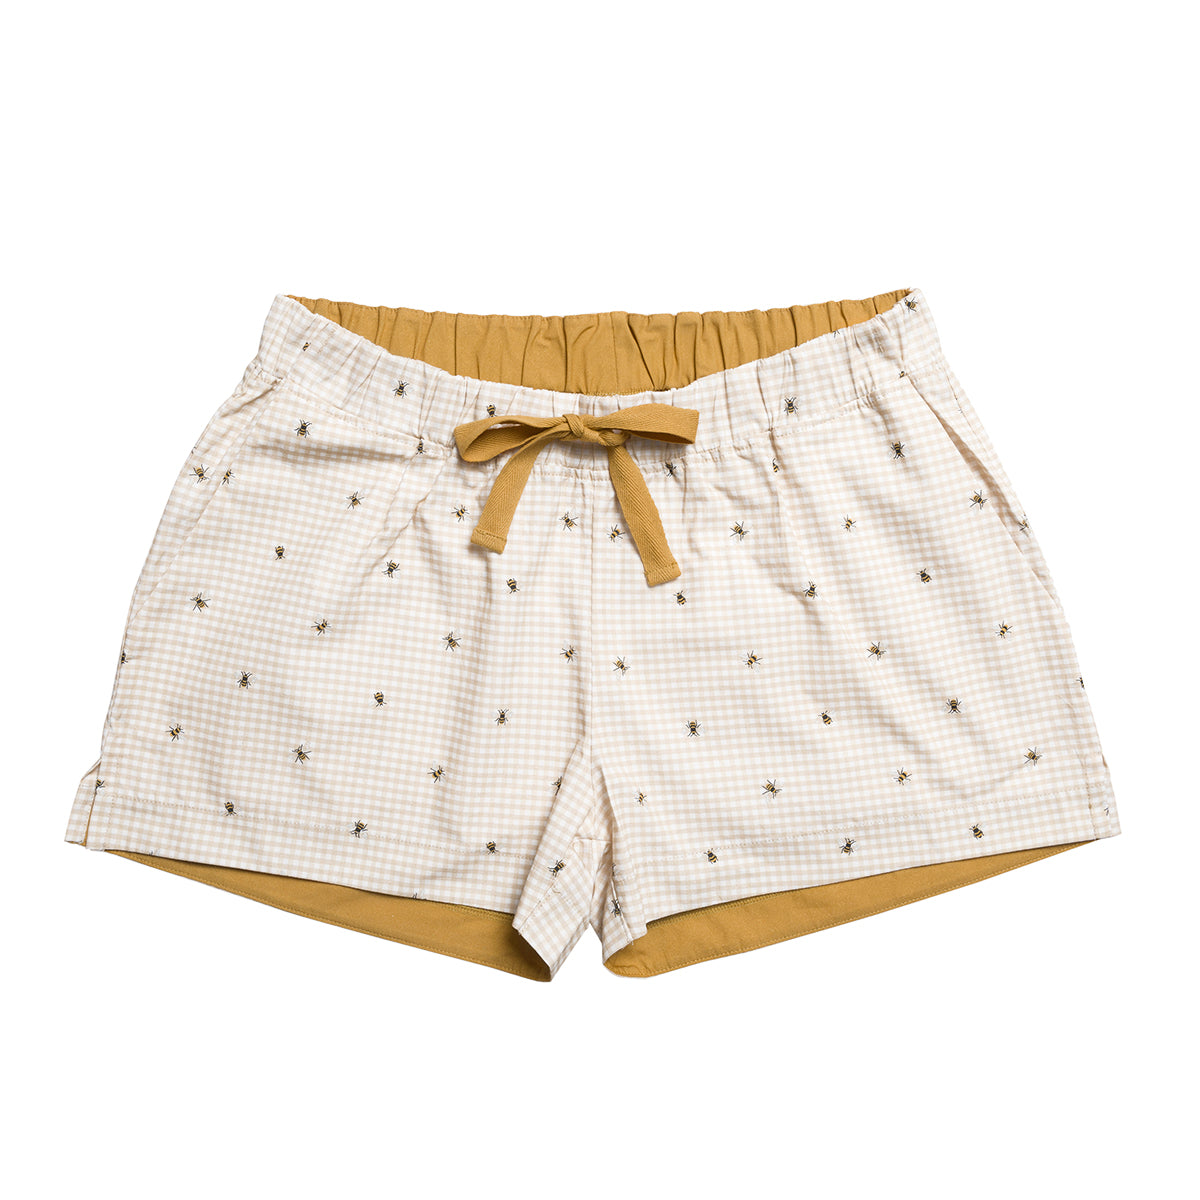 Bees Pyjama Shorts by Sophie Allport